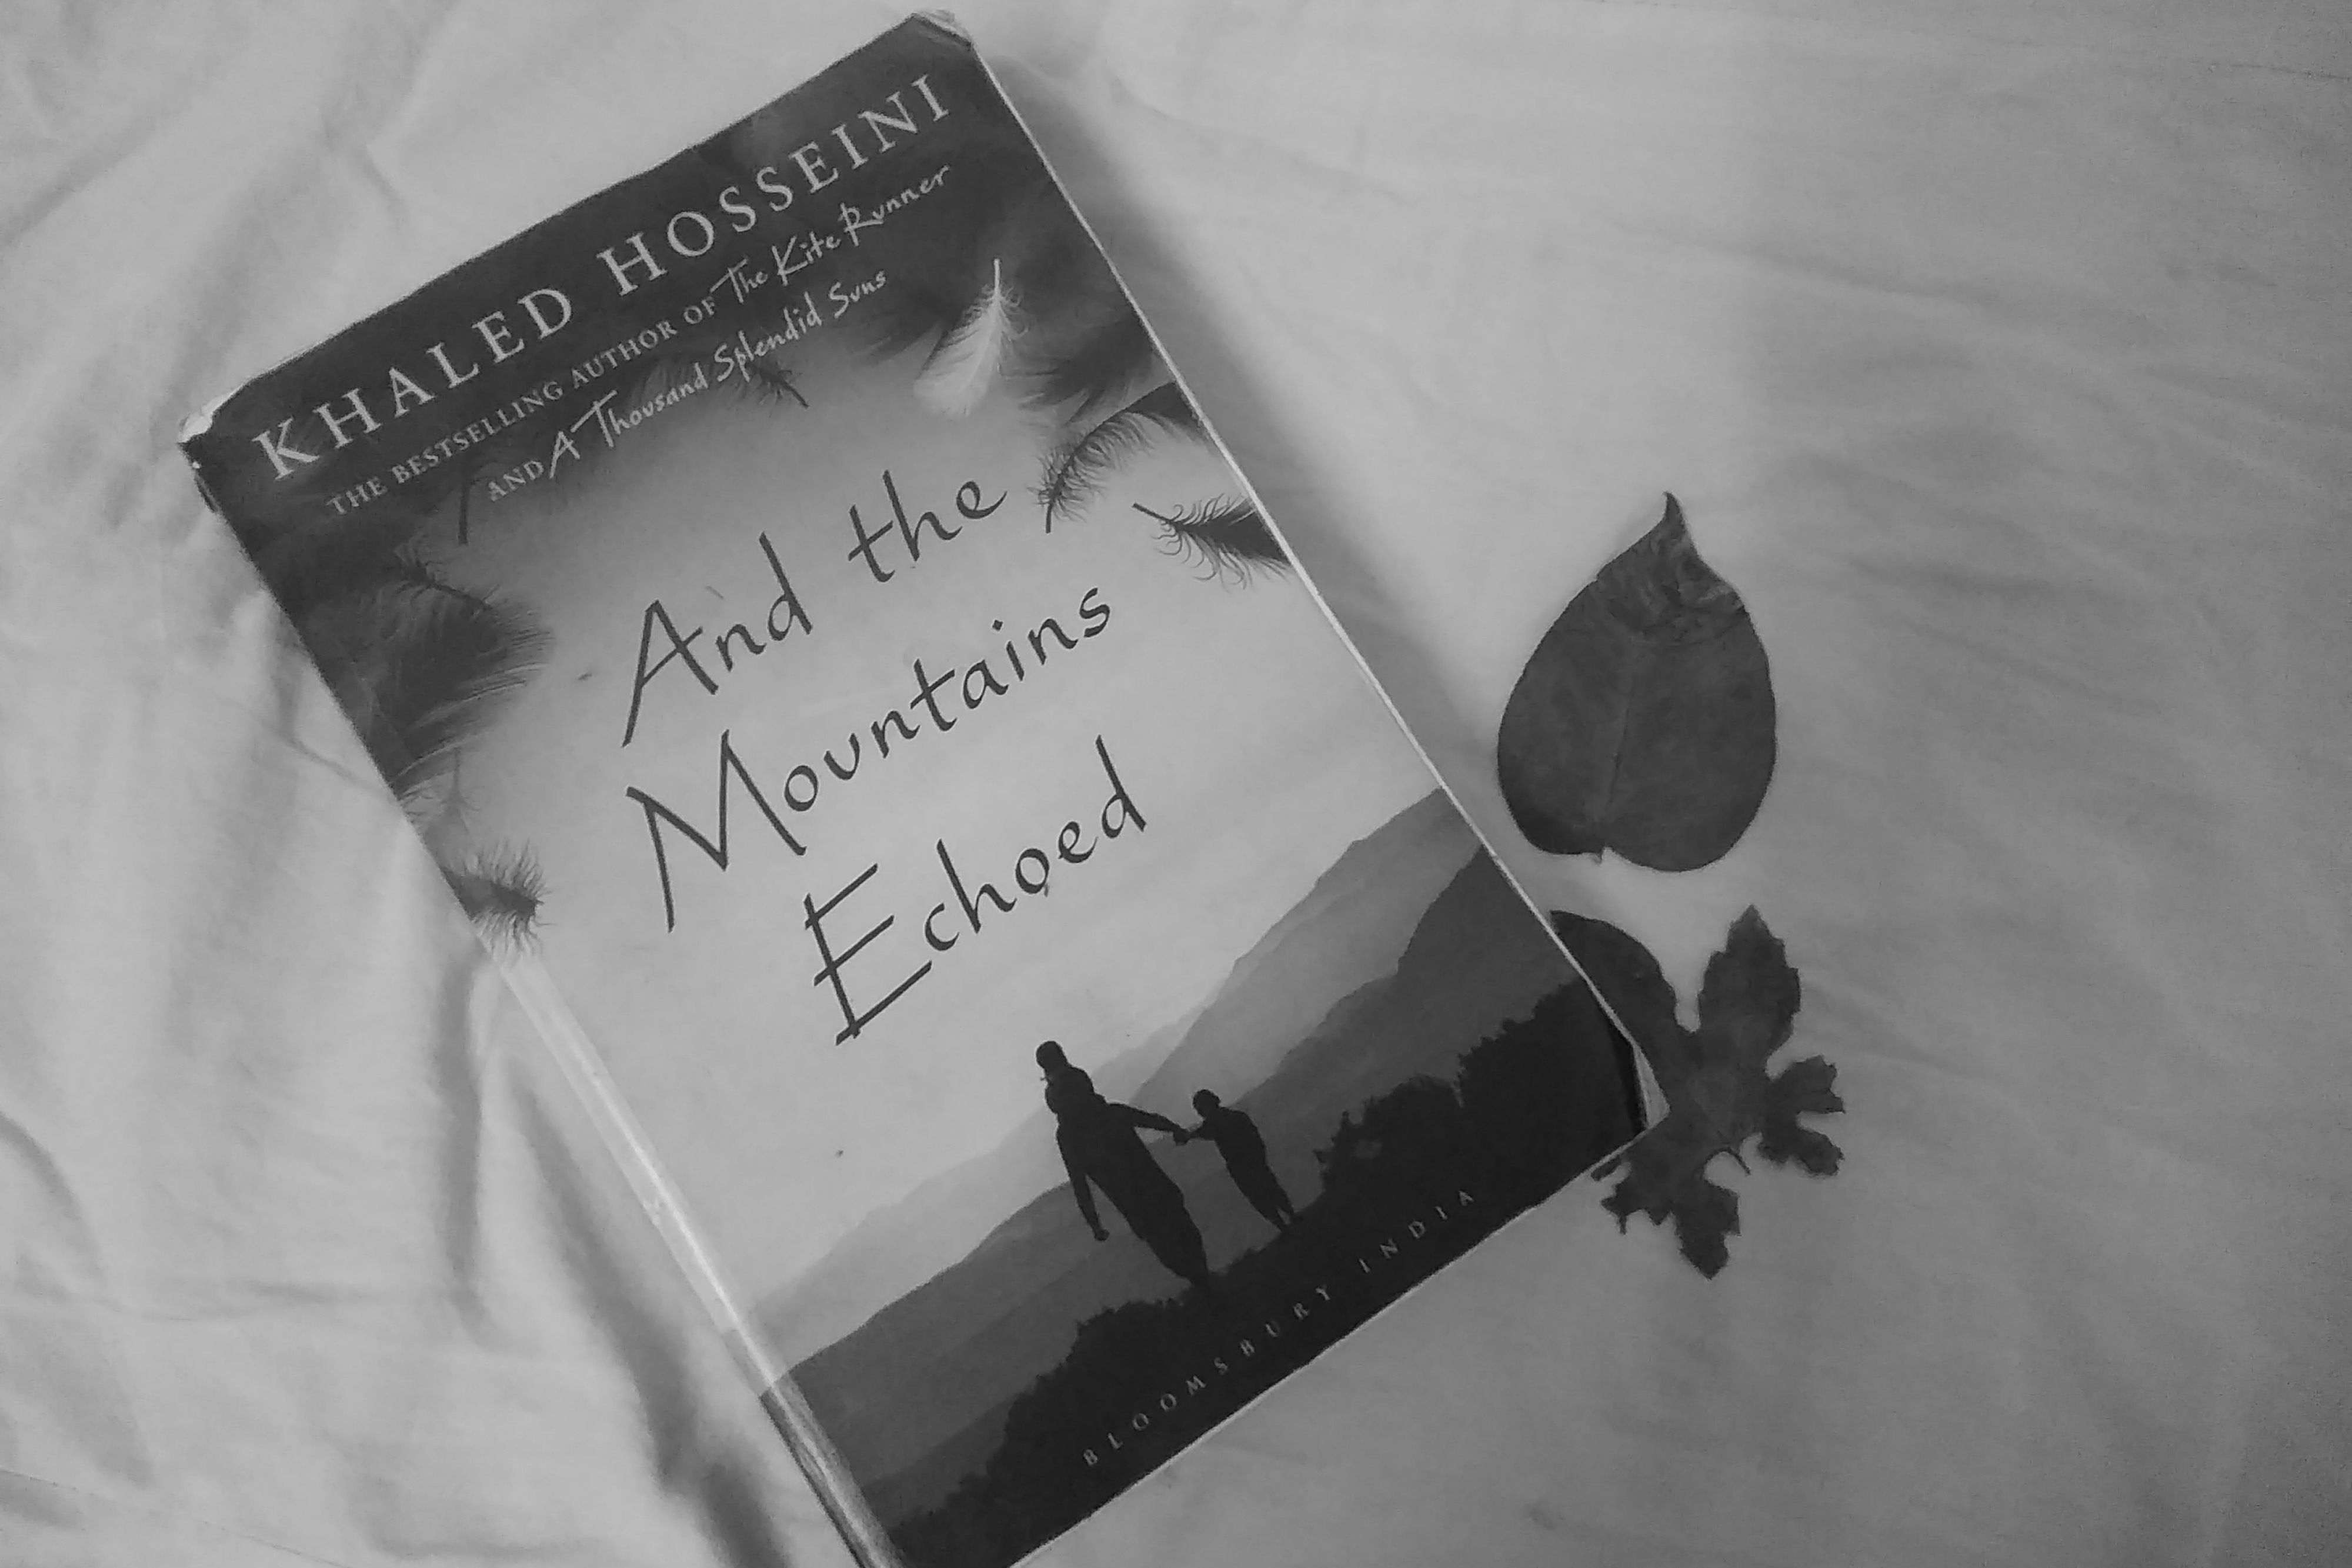 The third book of Khaled Hosseini called 'And The Mountains Echoed' placed on a table cloth amidst aesthetic looking dried leaves.